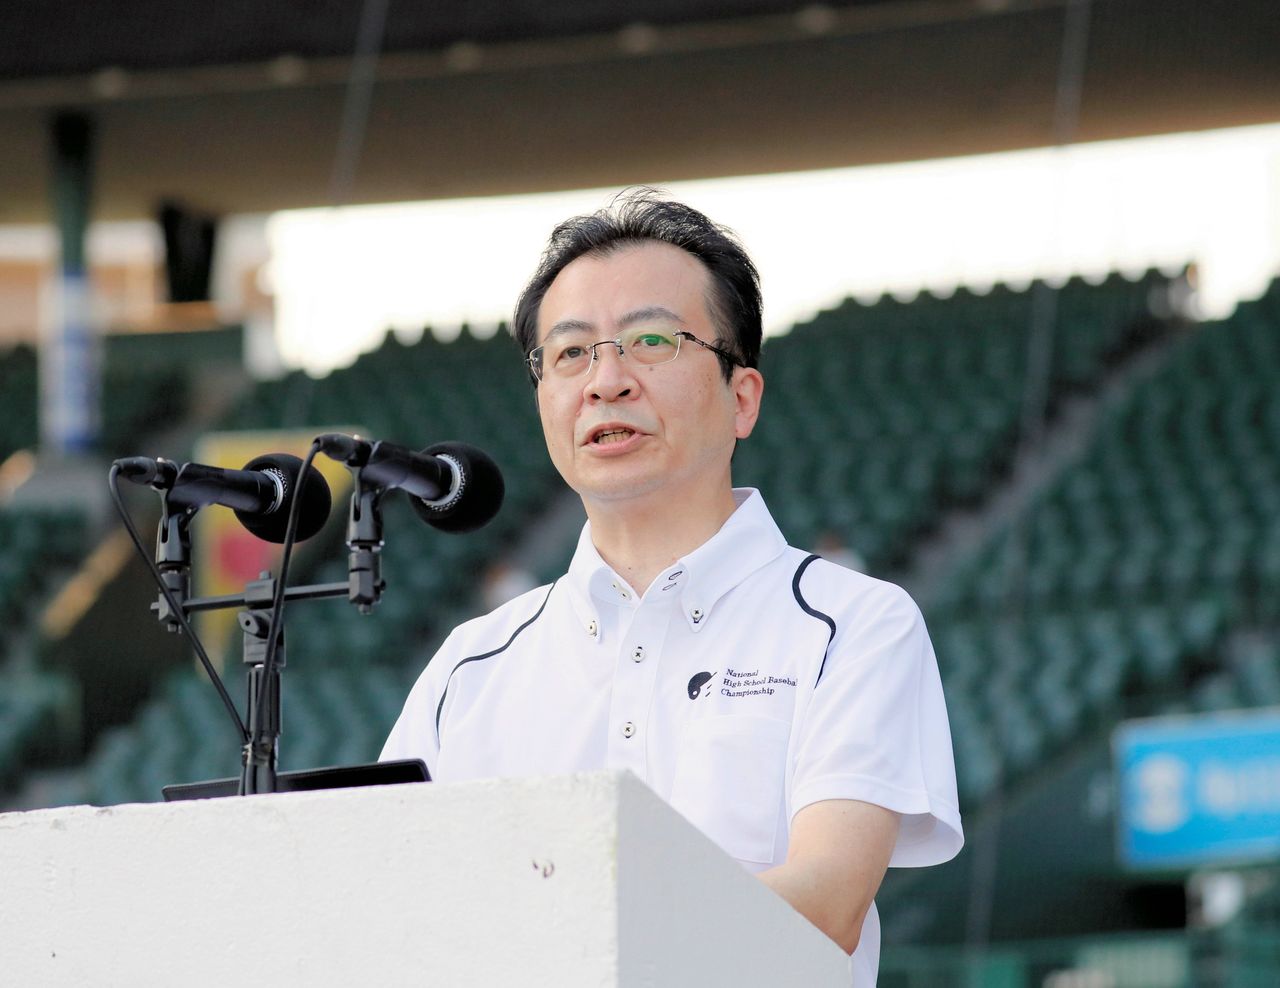 Asahi Shimbun President Nakamura Shirō speaks during the closing ceremony of the summer high school baseball championship on August 29, 2021, at Kōshien Stadium in Hyōgo Prefecture. The paper is a main sponsor of the competition. (© Jiji)